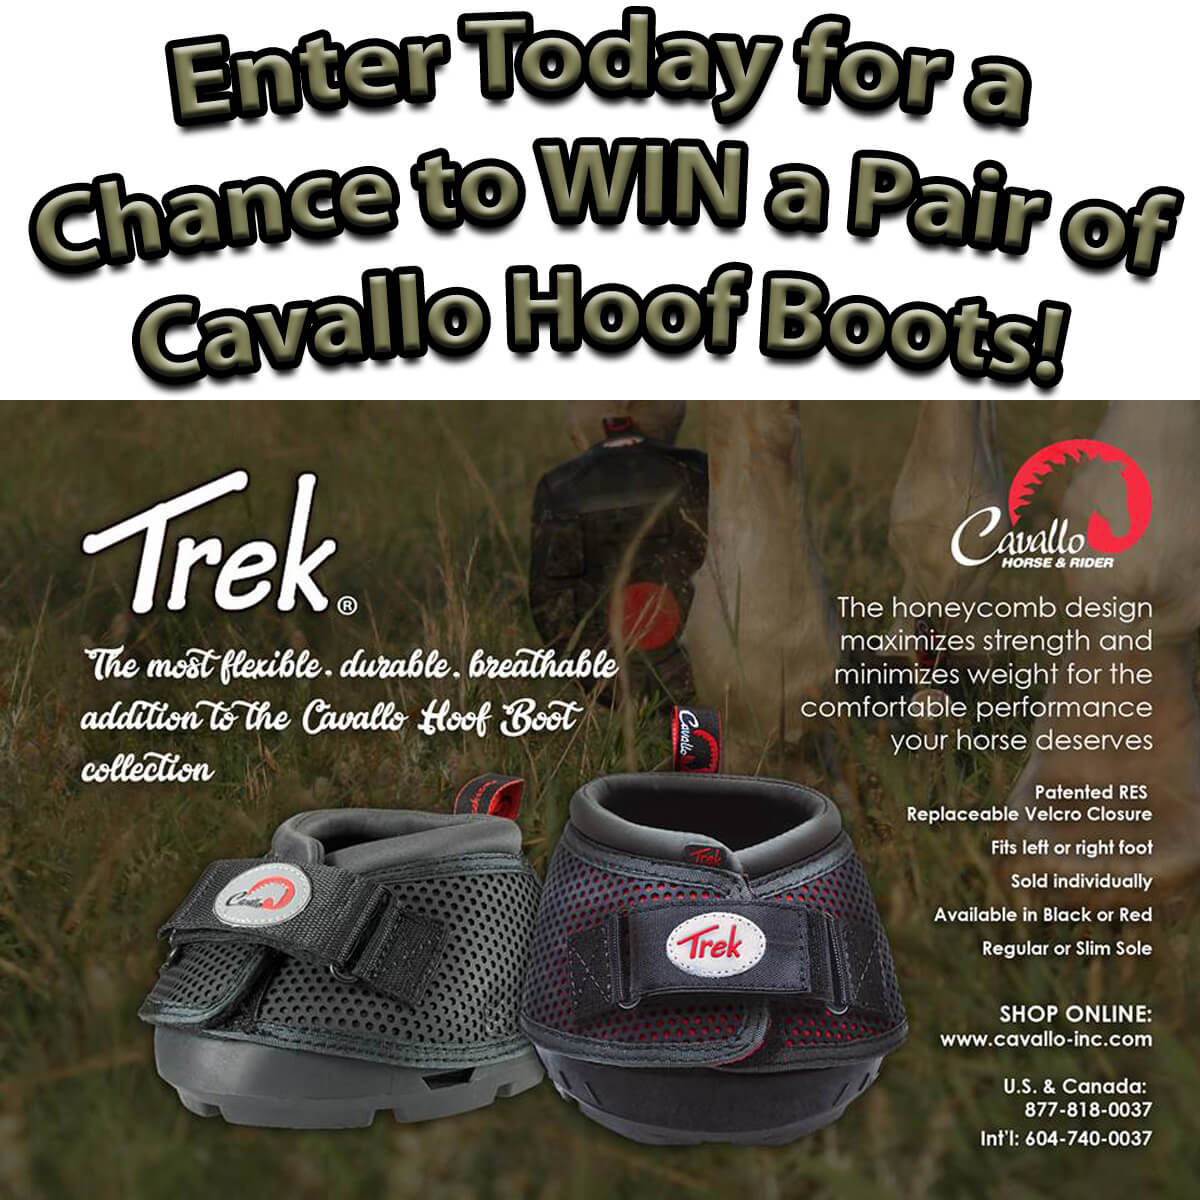 July Email Subscriber Drawing Sponsor – Cavallo Hoof Boots